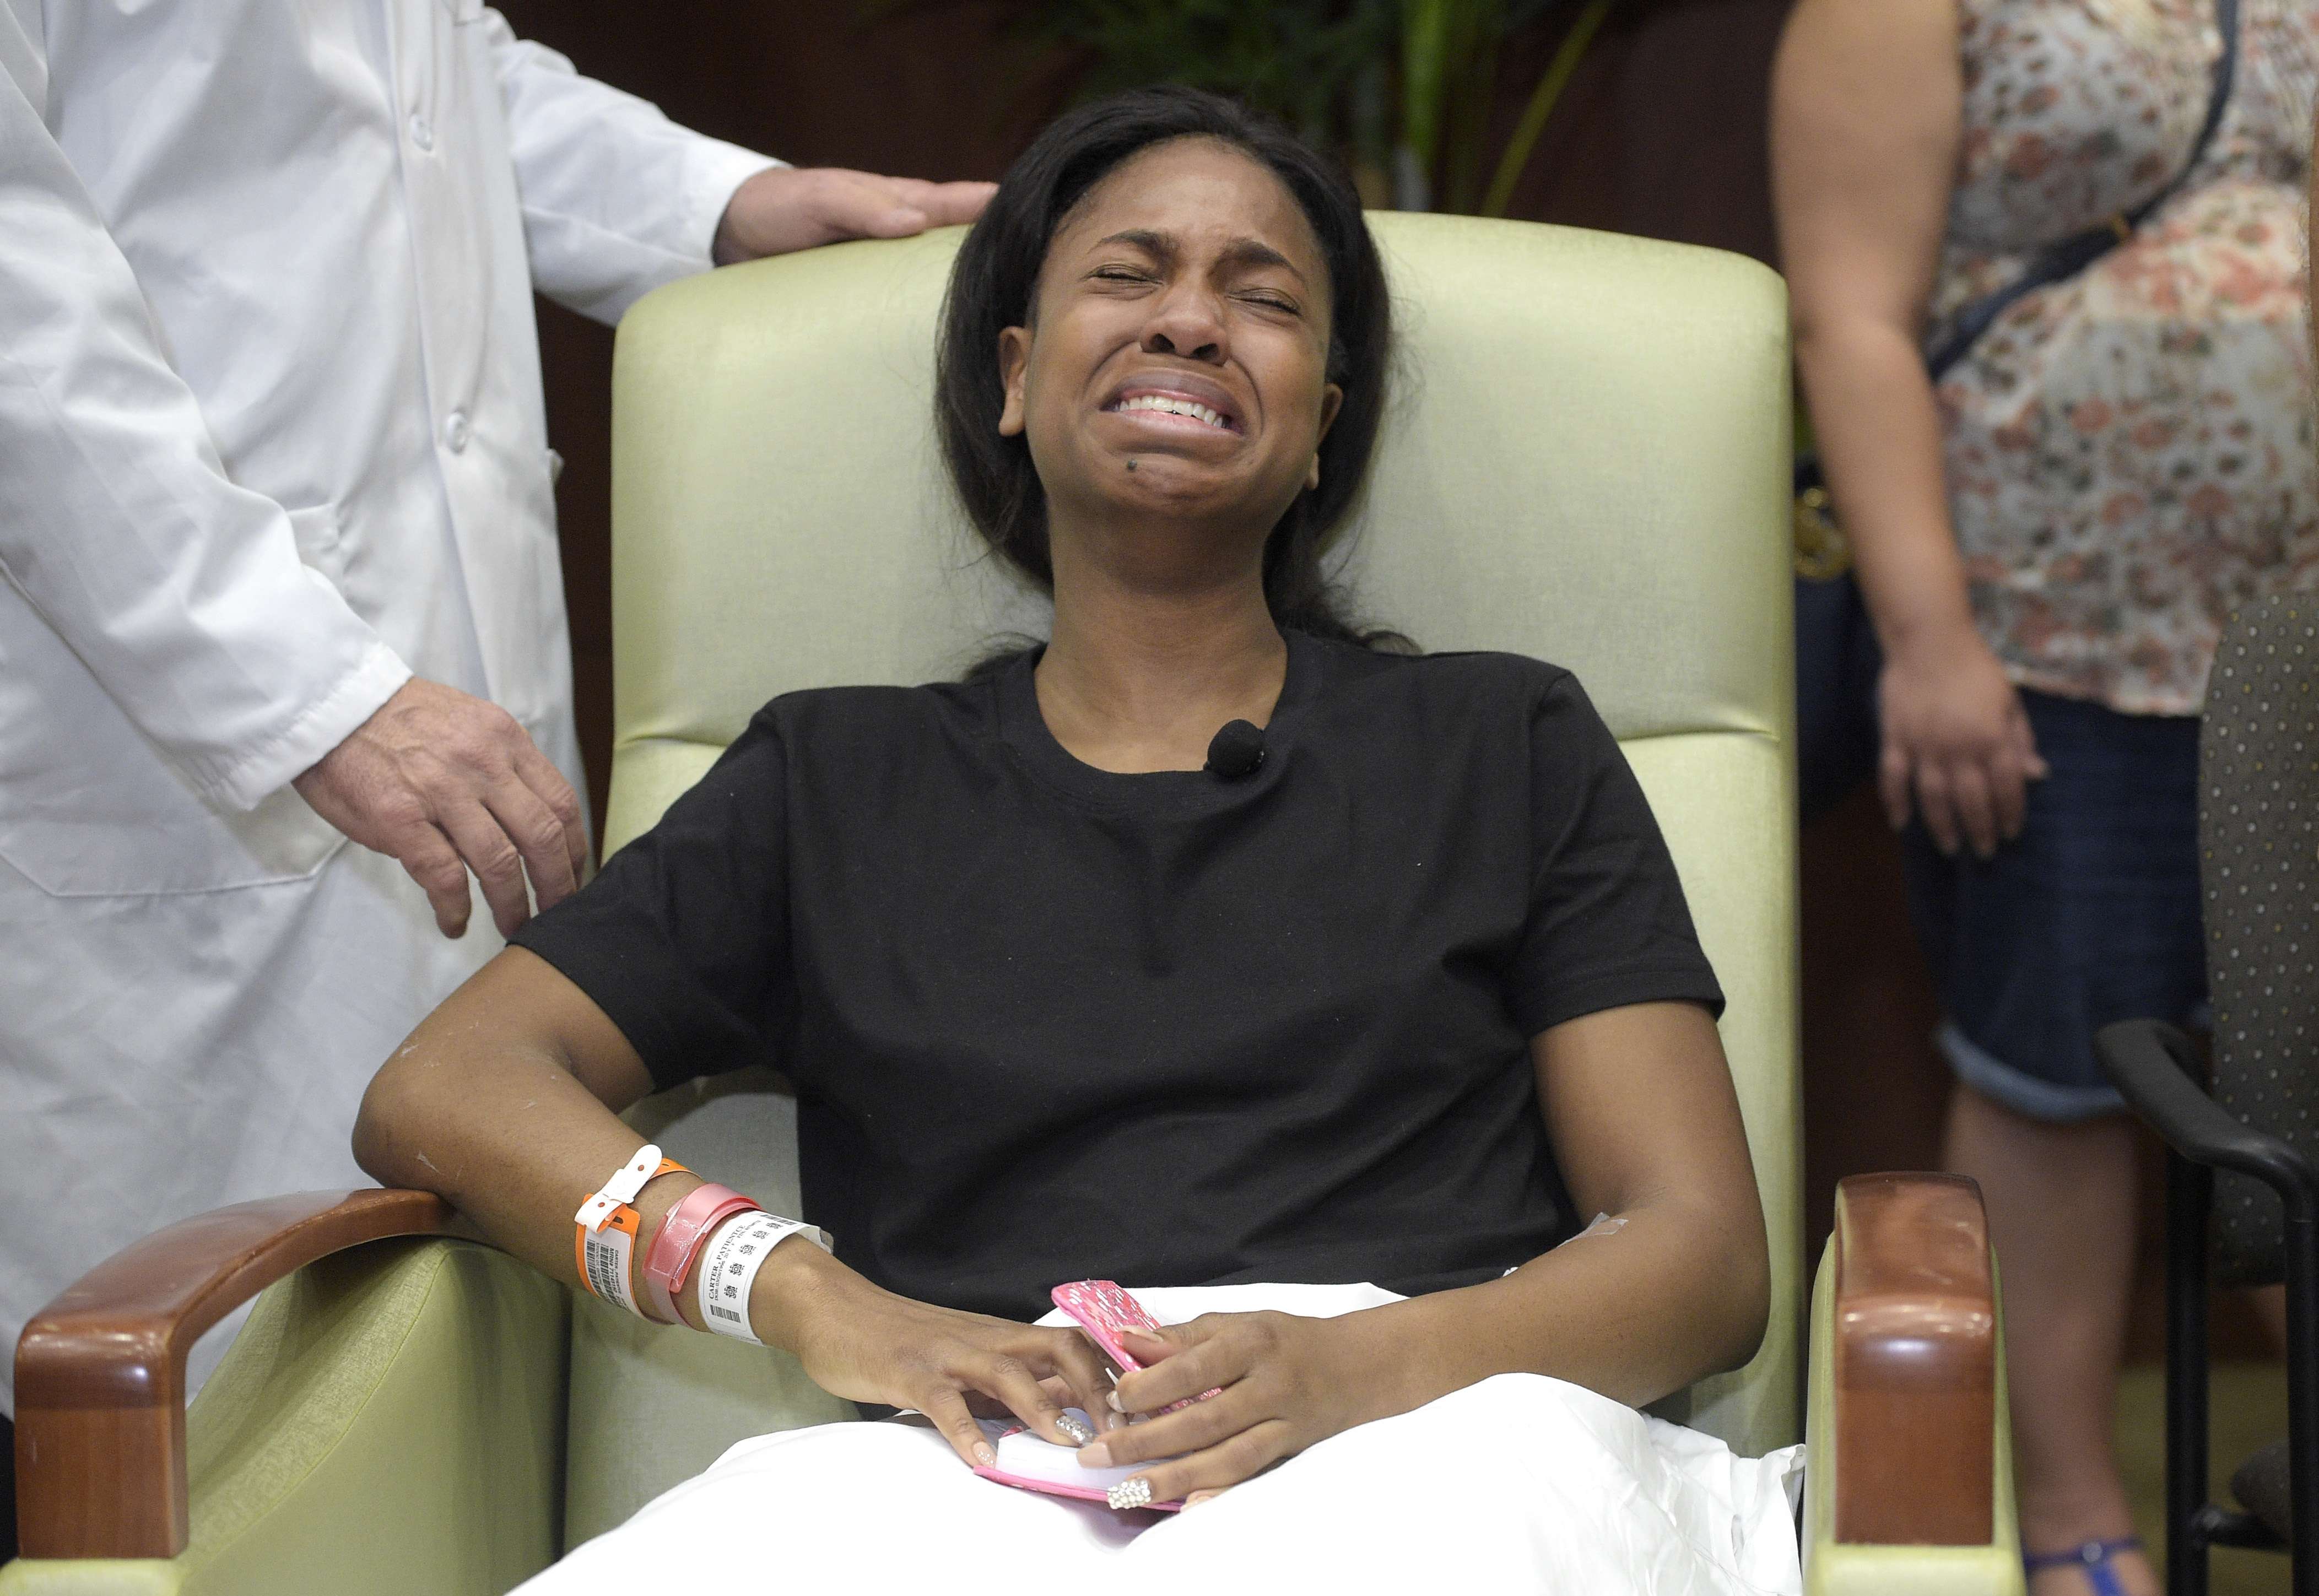 Patience Carter, a survivor of the Pulse nightclub shooting, sobs after telling her story during a news conference at Florida Hospital Orlando on Tuesday. Photo: AP